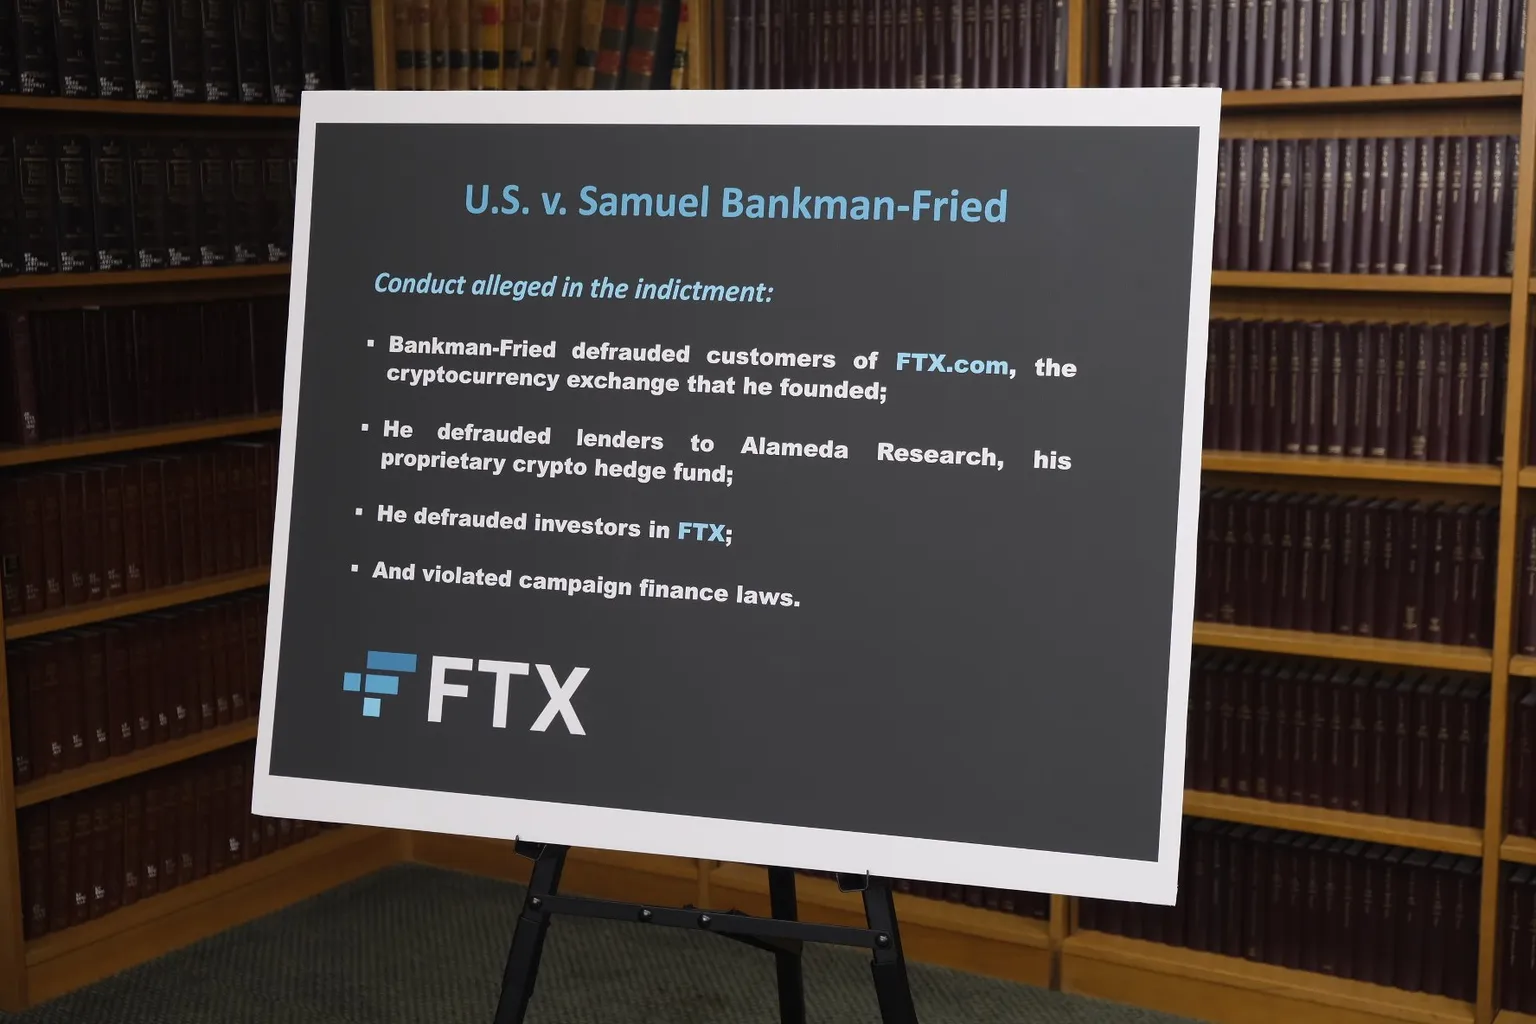 A visual aide summarizing charges against Bankman-Fried.